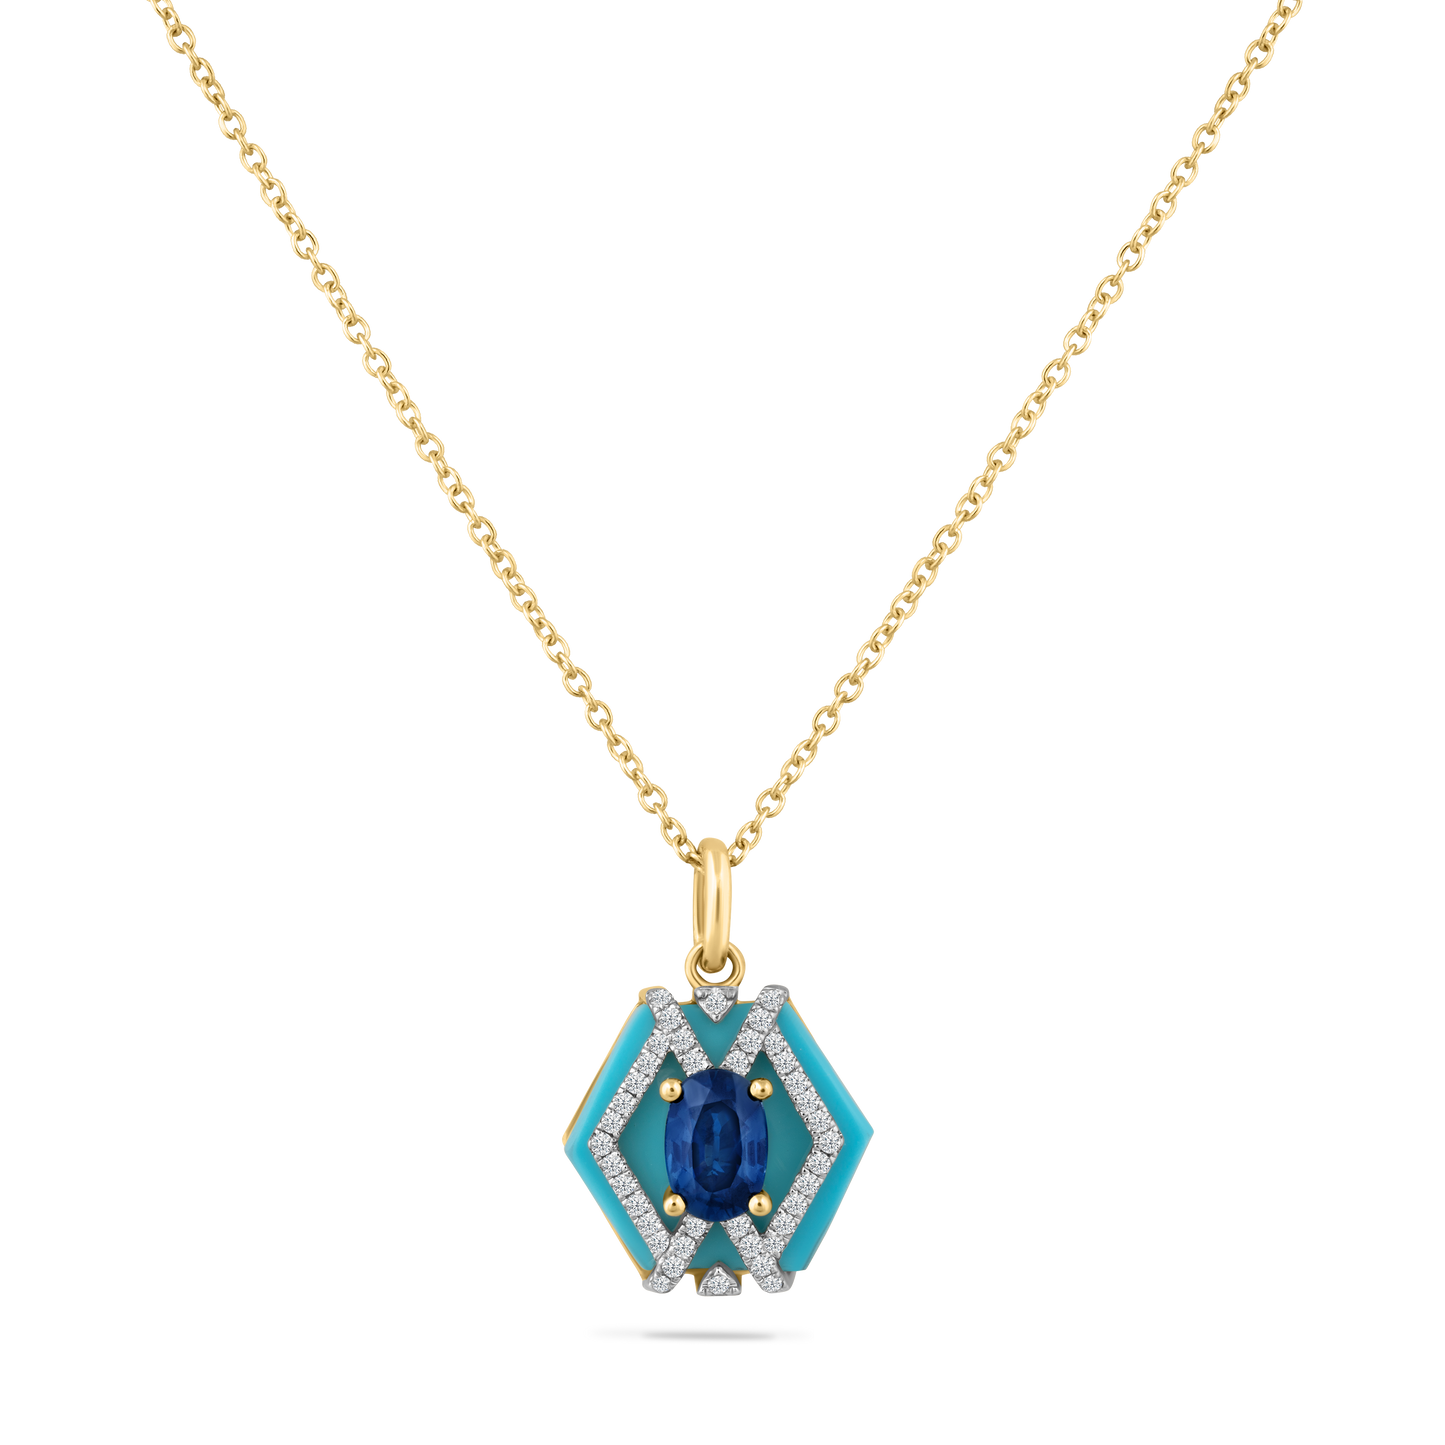 14K HEXAGON SHAPED RECON TURQUOISE PENDANT WITH 40 DIAMONDS 0.13CT AND 1 SAPPHIRE 0.50CT ON 18 INCHES CABLE CHAIN